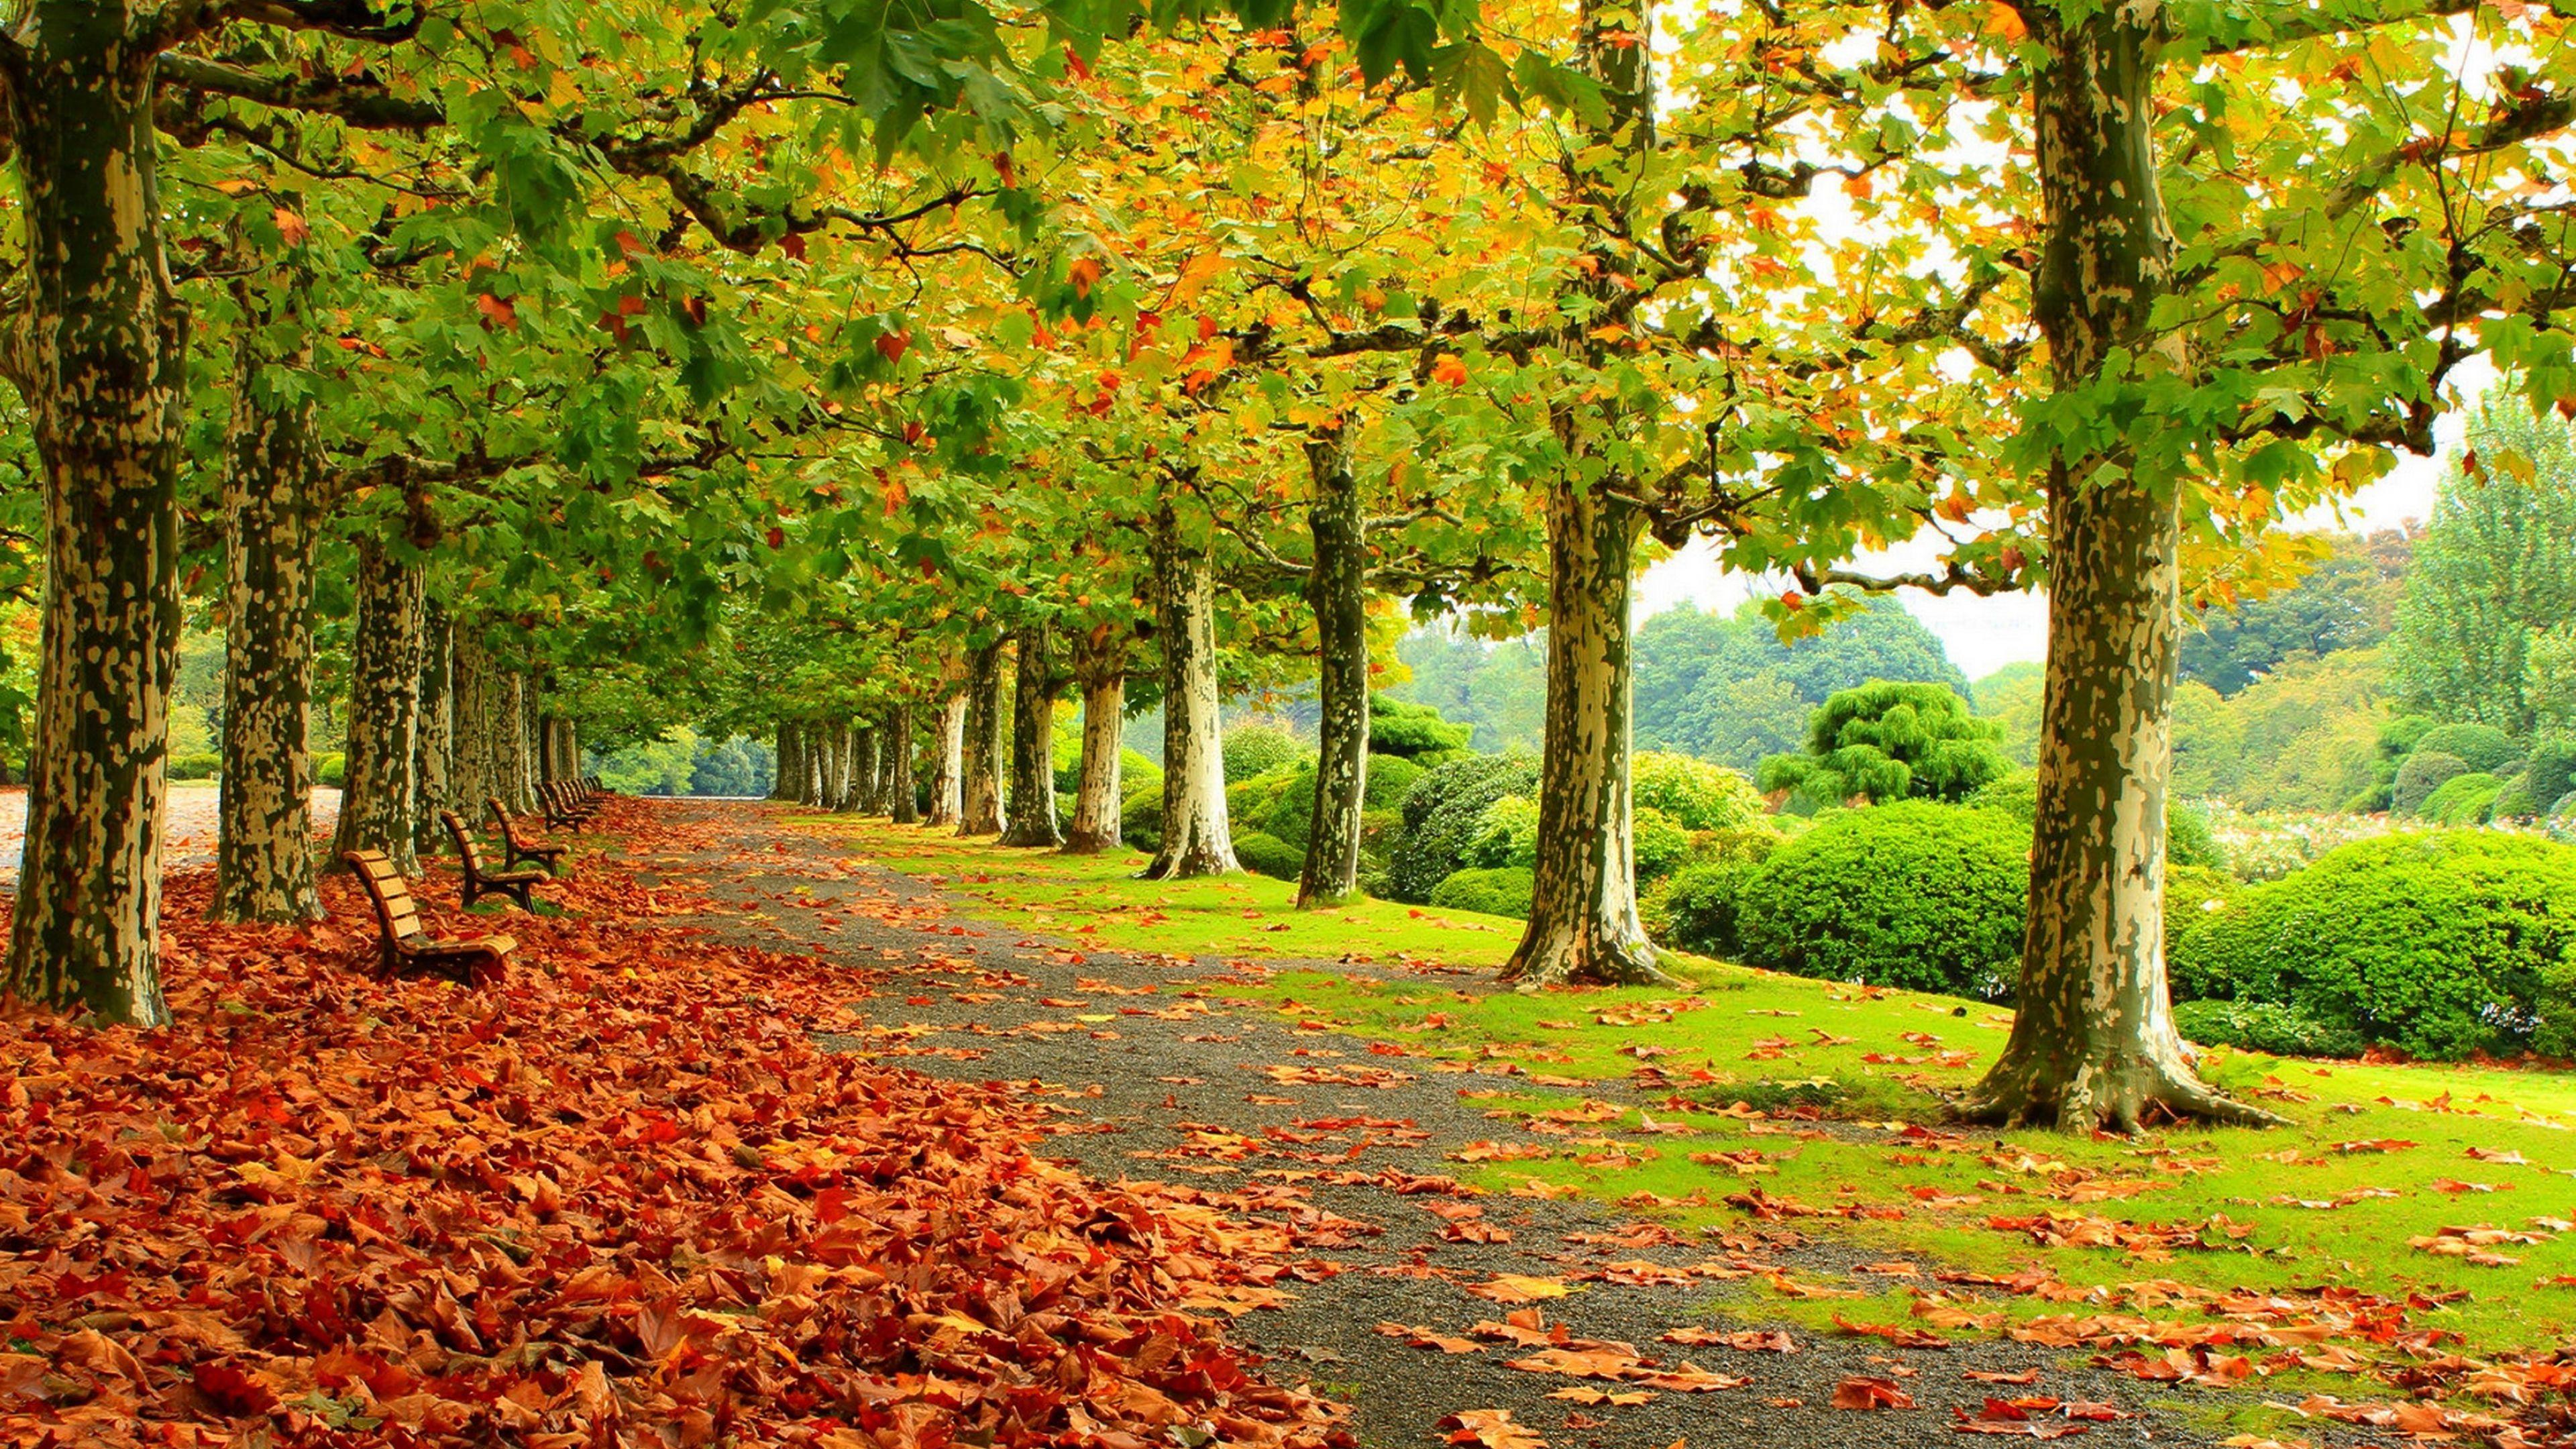 Hd Path In The Autumn Park Wallpaper - Beautiful Park Wallpaper Hd -  3840x2160 Wallpaper 